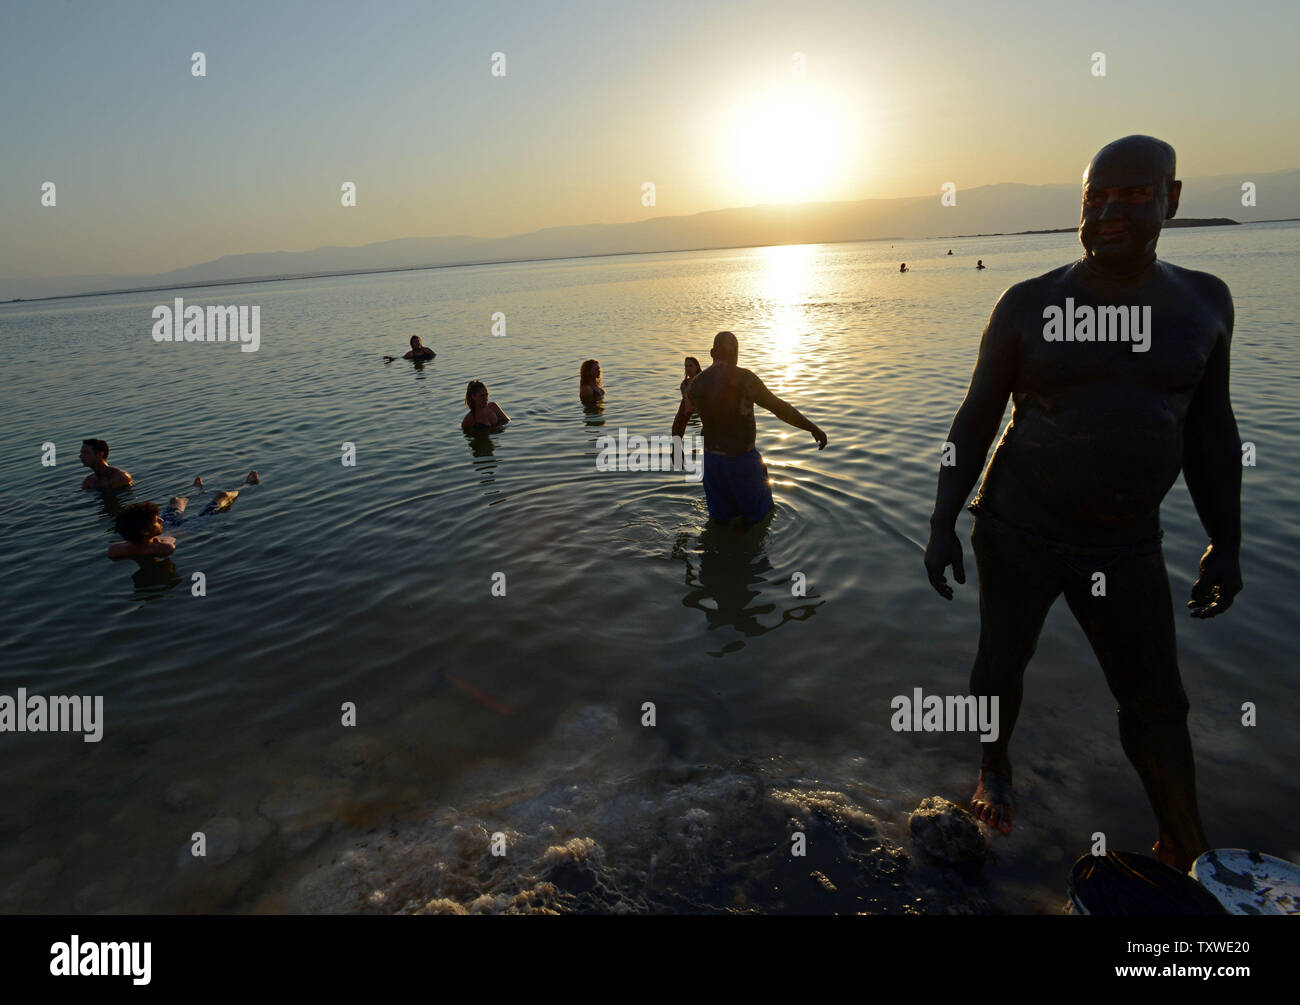 Israeli and international environmental social activists participate in a protest float at dawn against the deterioration of the Dead Sea, in an event organized by U.S. photographer Spencer Tunick, not seen, at Ein Bokek, Israel, September 14, 2012. UPI/Debbie Hill Stock Photo